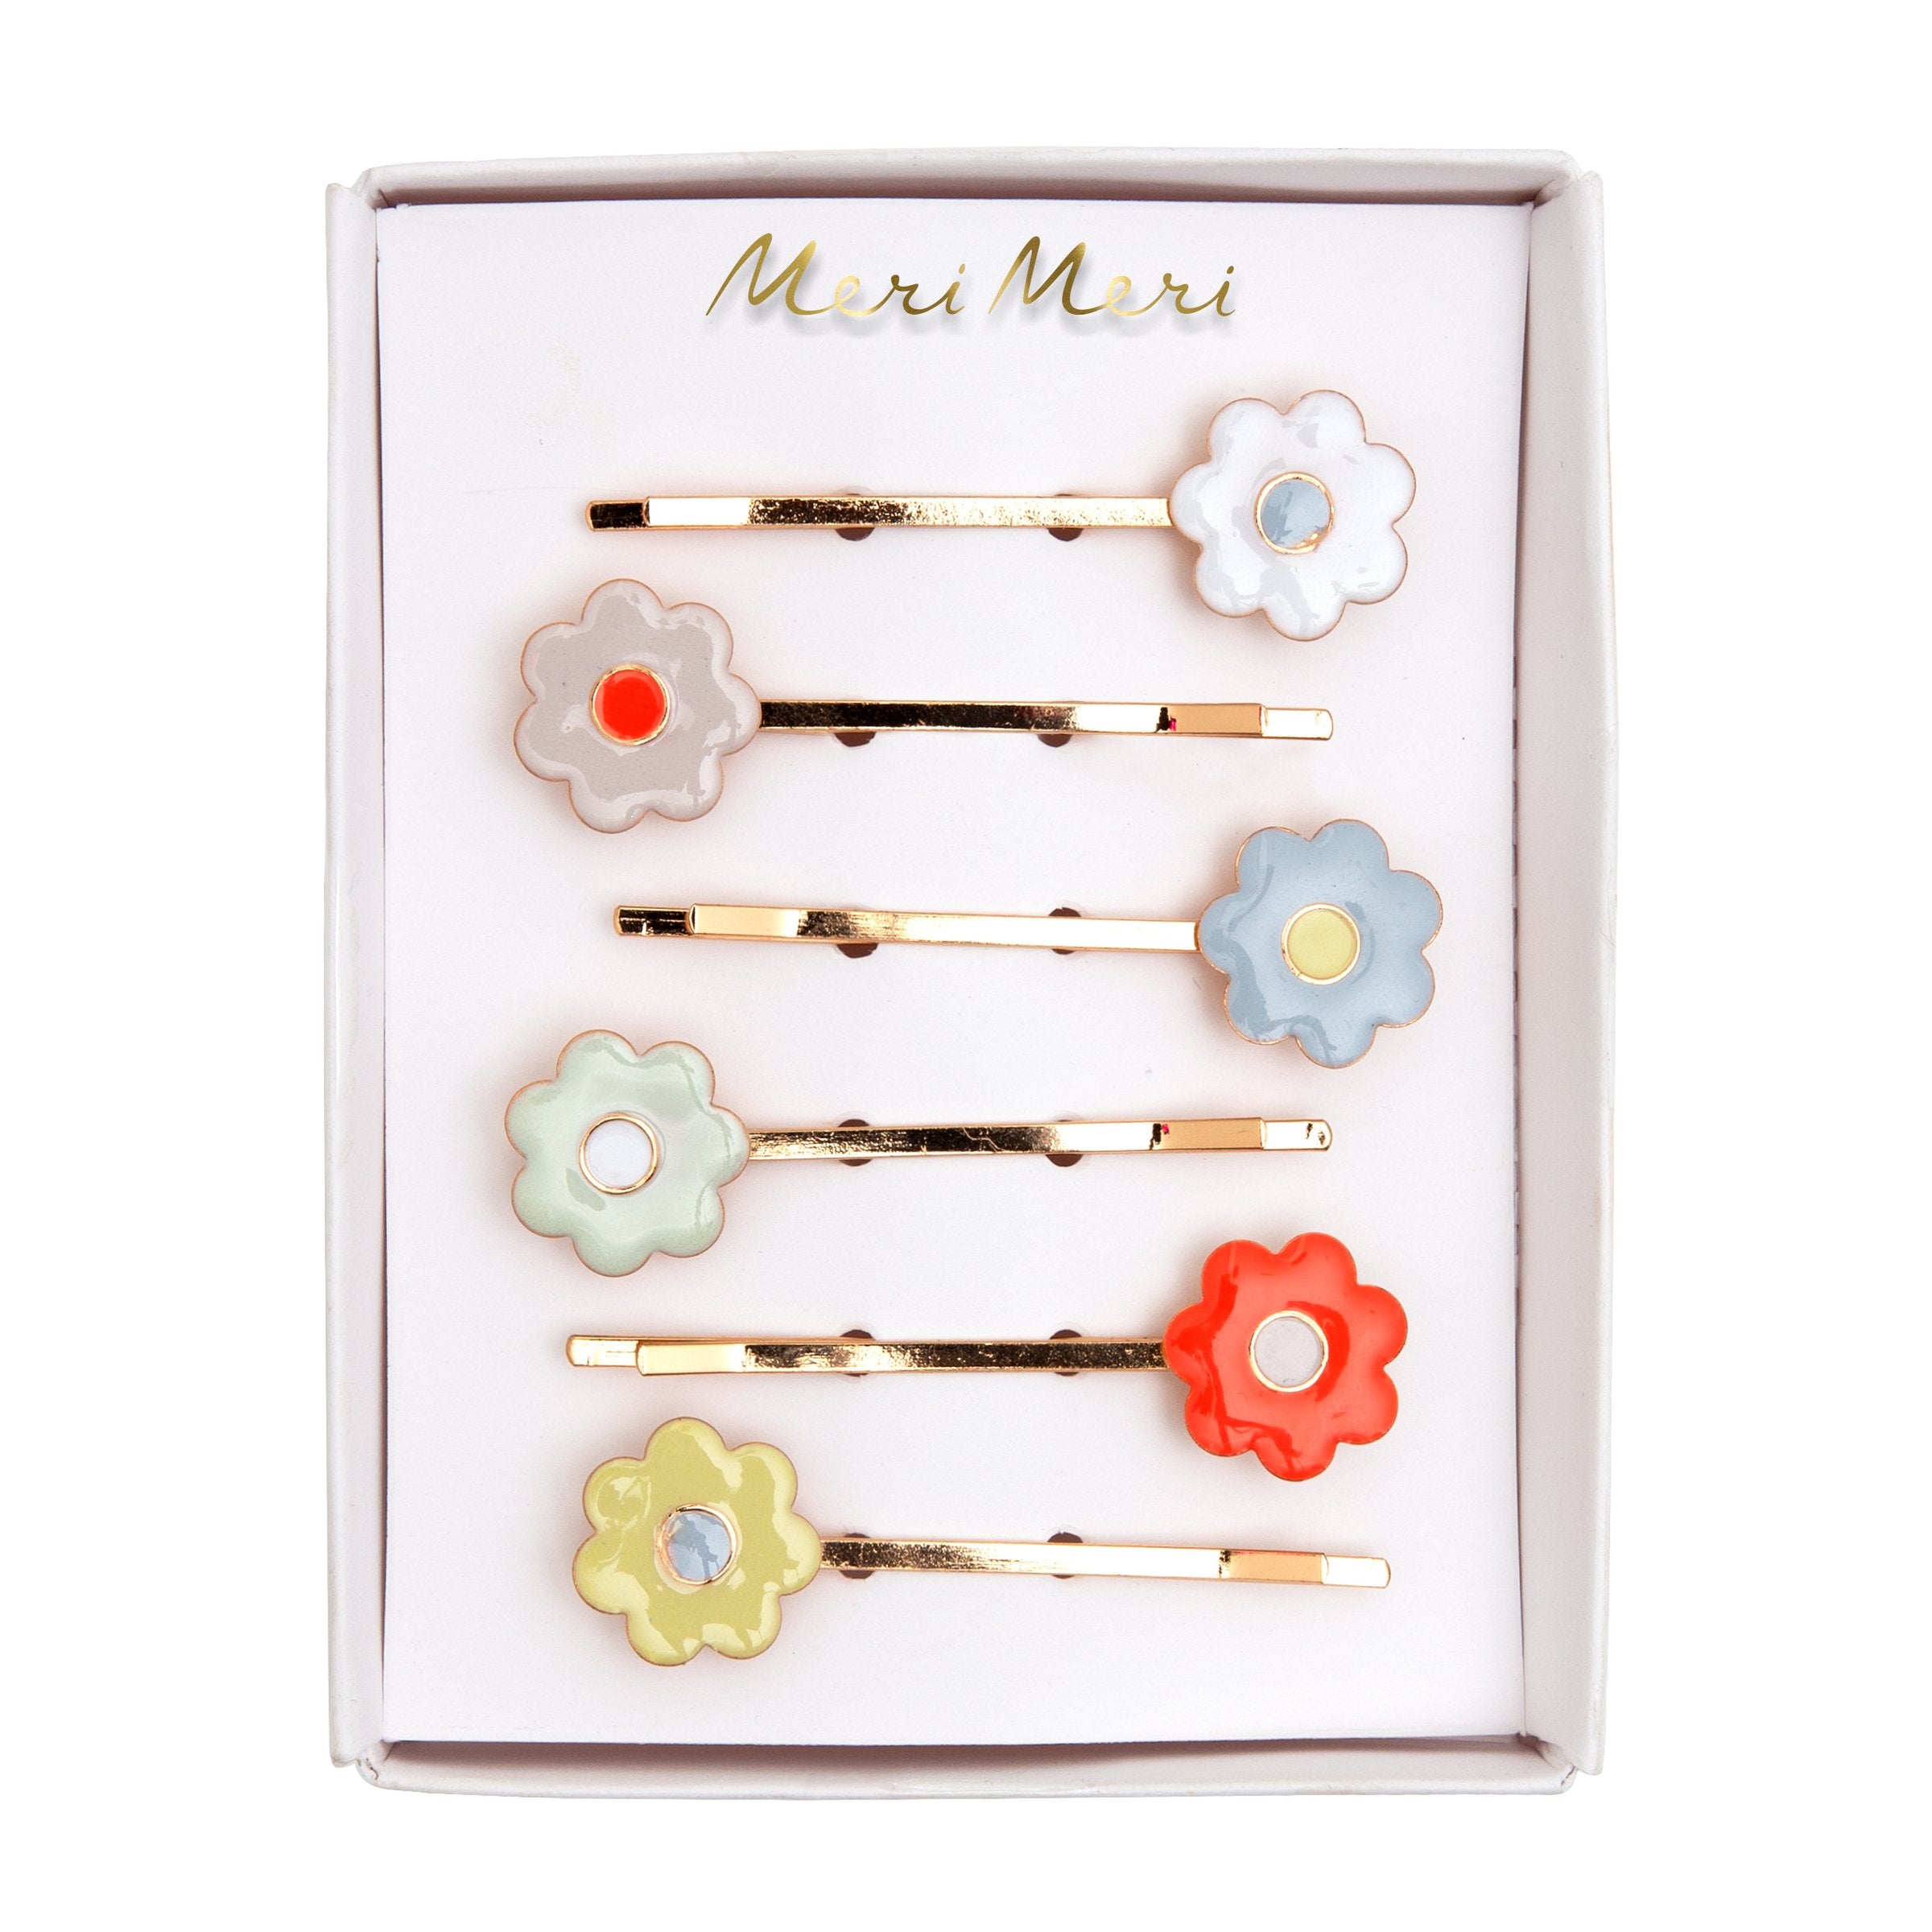 They are crafted from enamel daisies, in 6 different colors, with gold tone hair slides.